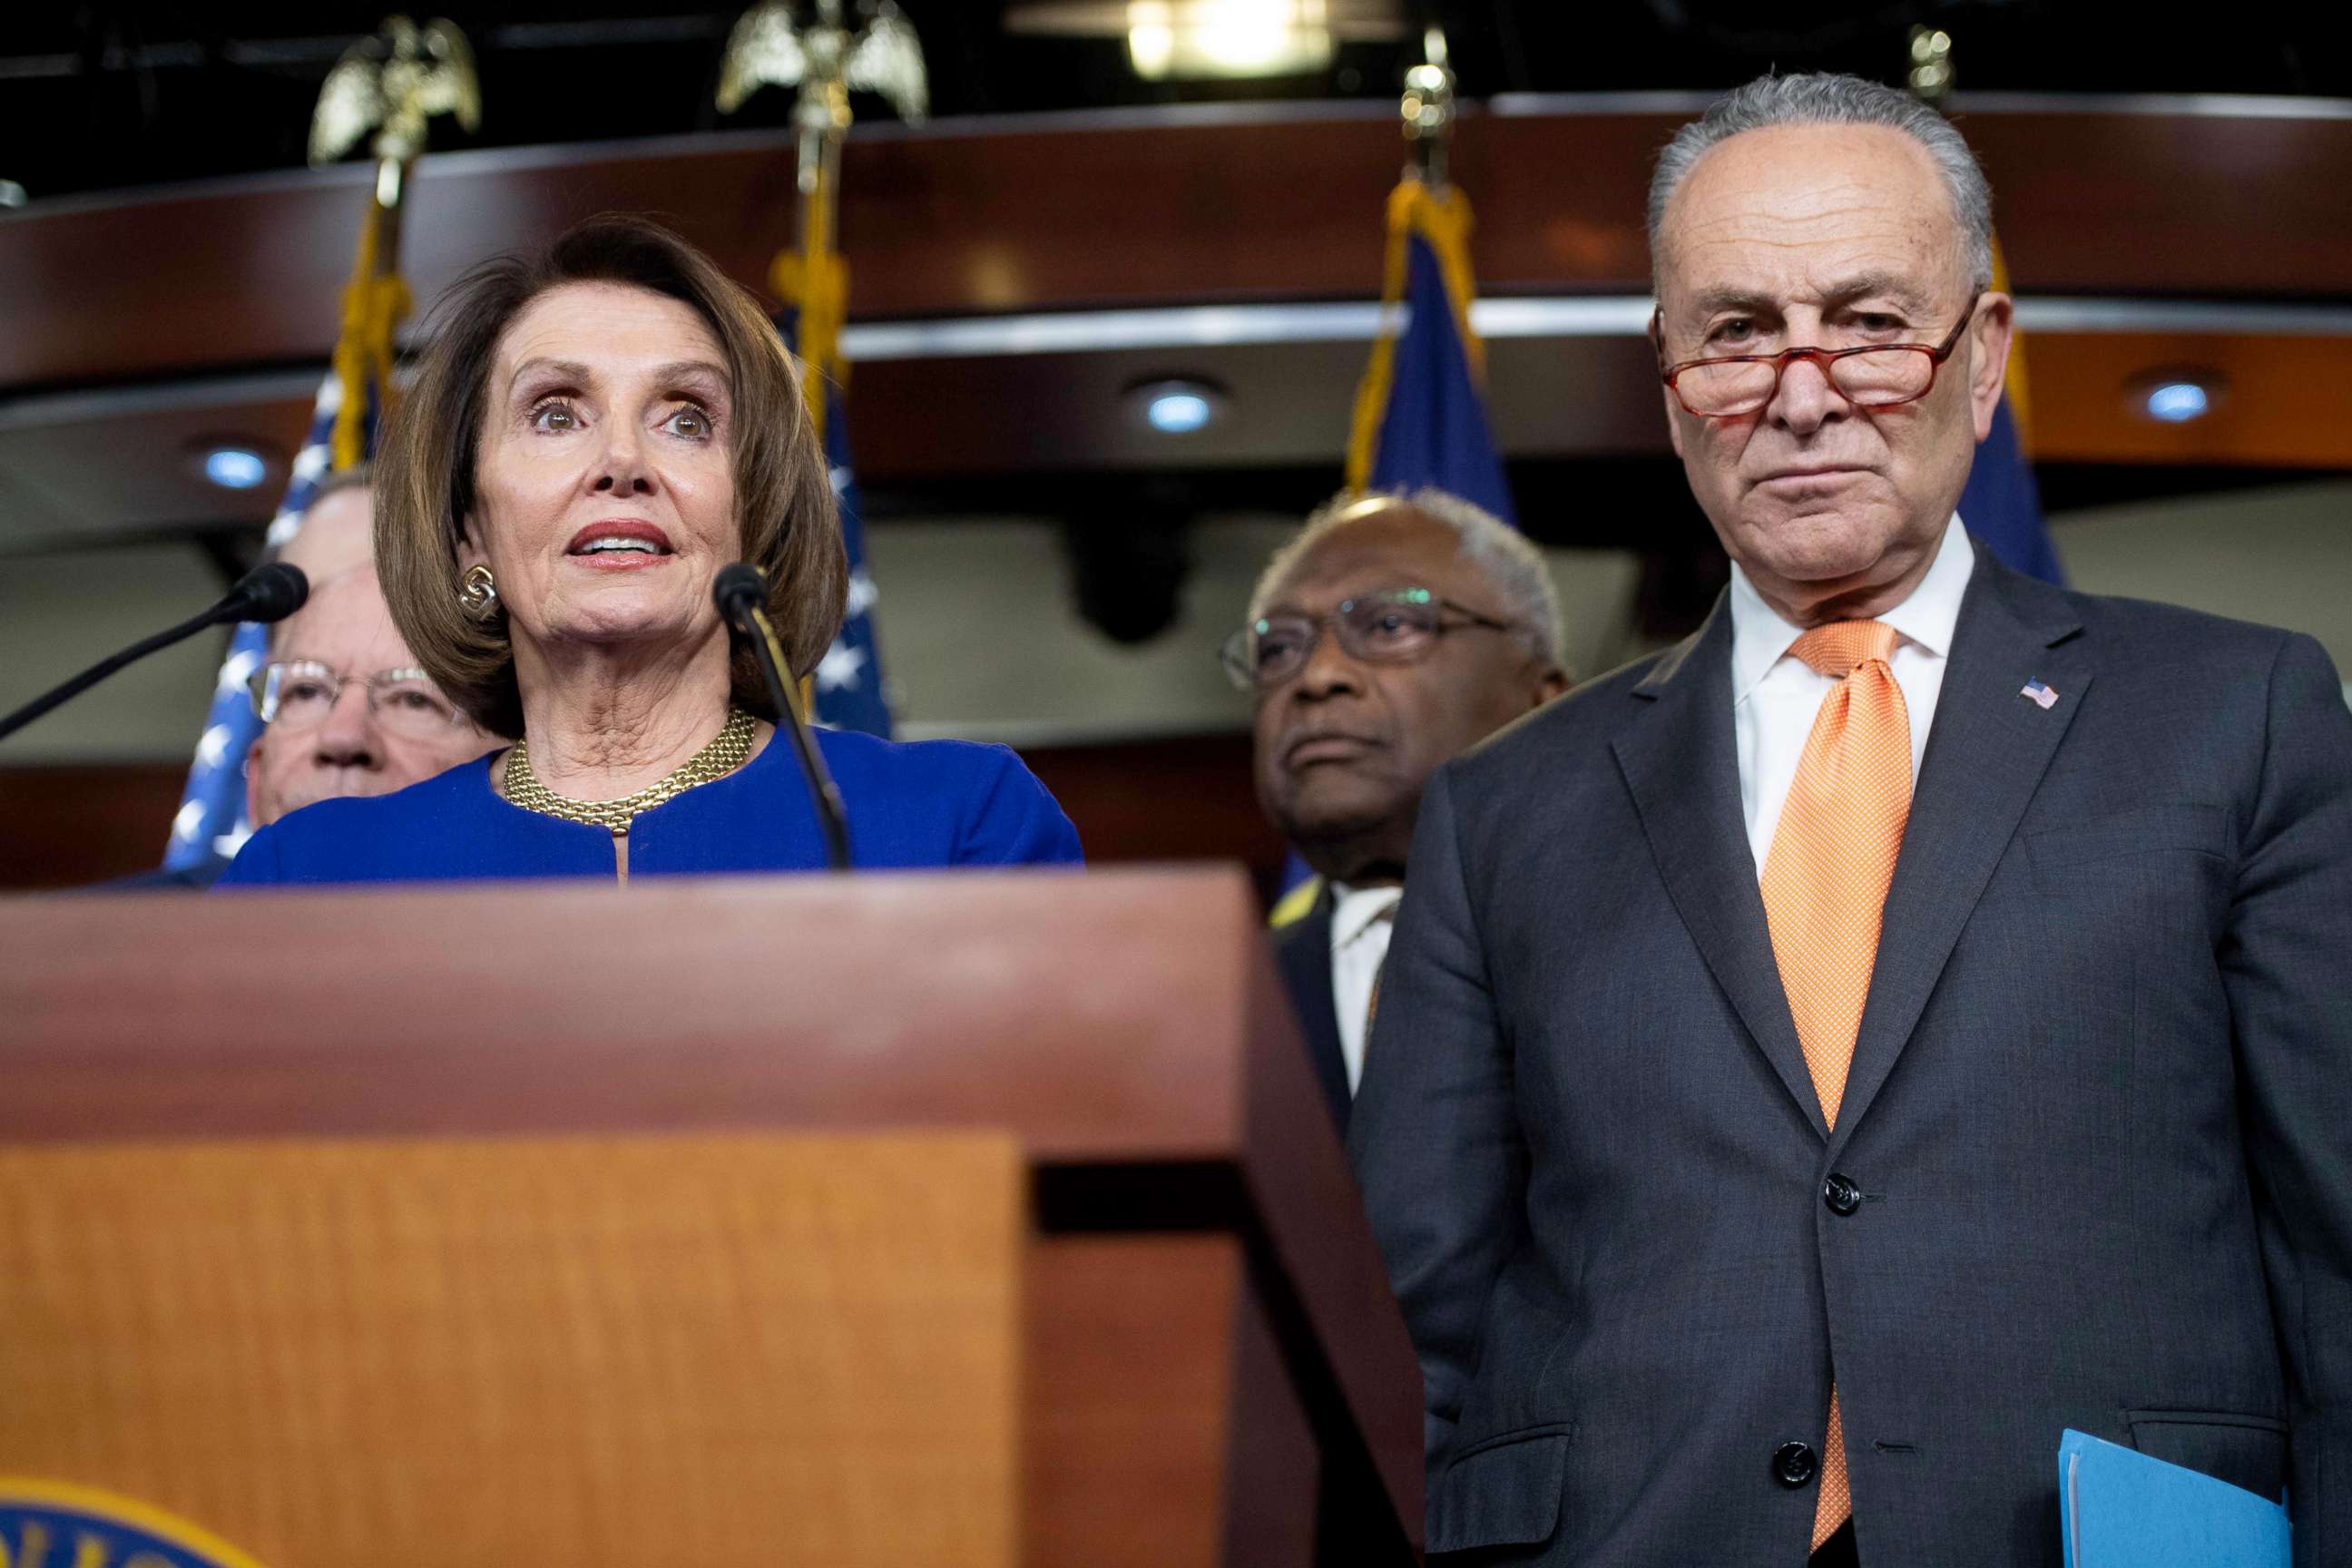 PHOTO: Speaker of the House Nancy Pelosi and Senate Democratic Leader Chuck Schumer hold a press conference on Capitol Hill in Washington, DC, May 22, 2019, following a meeting with US President Donald Trump at the White House.